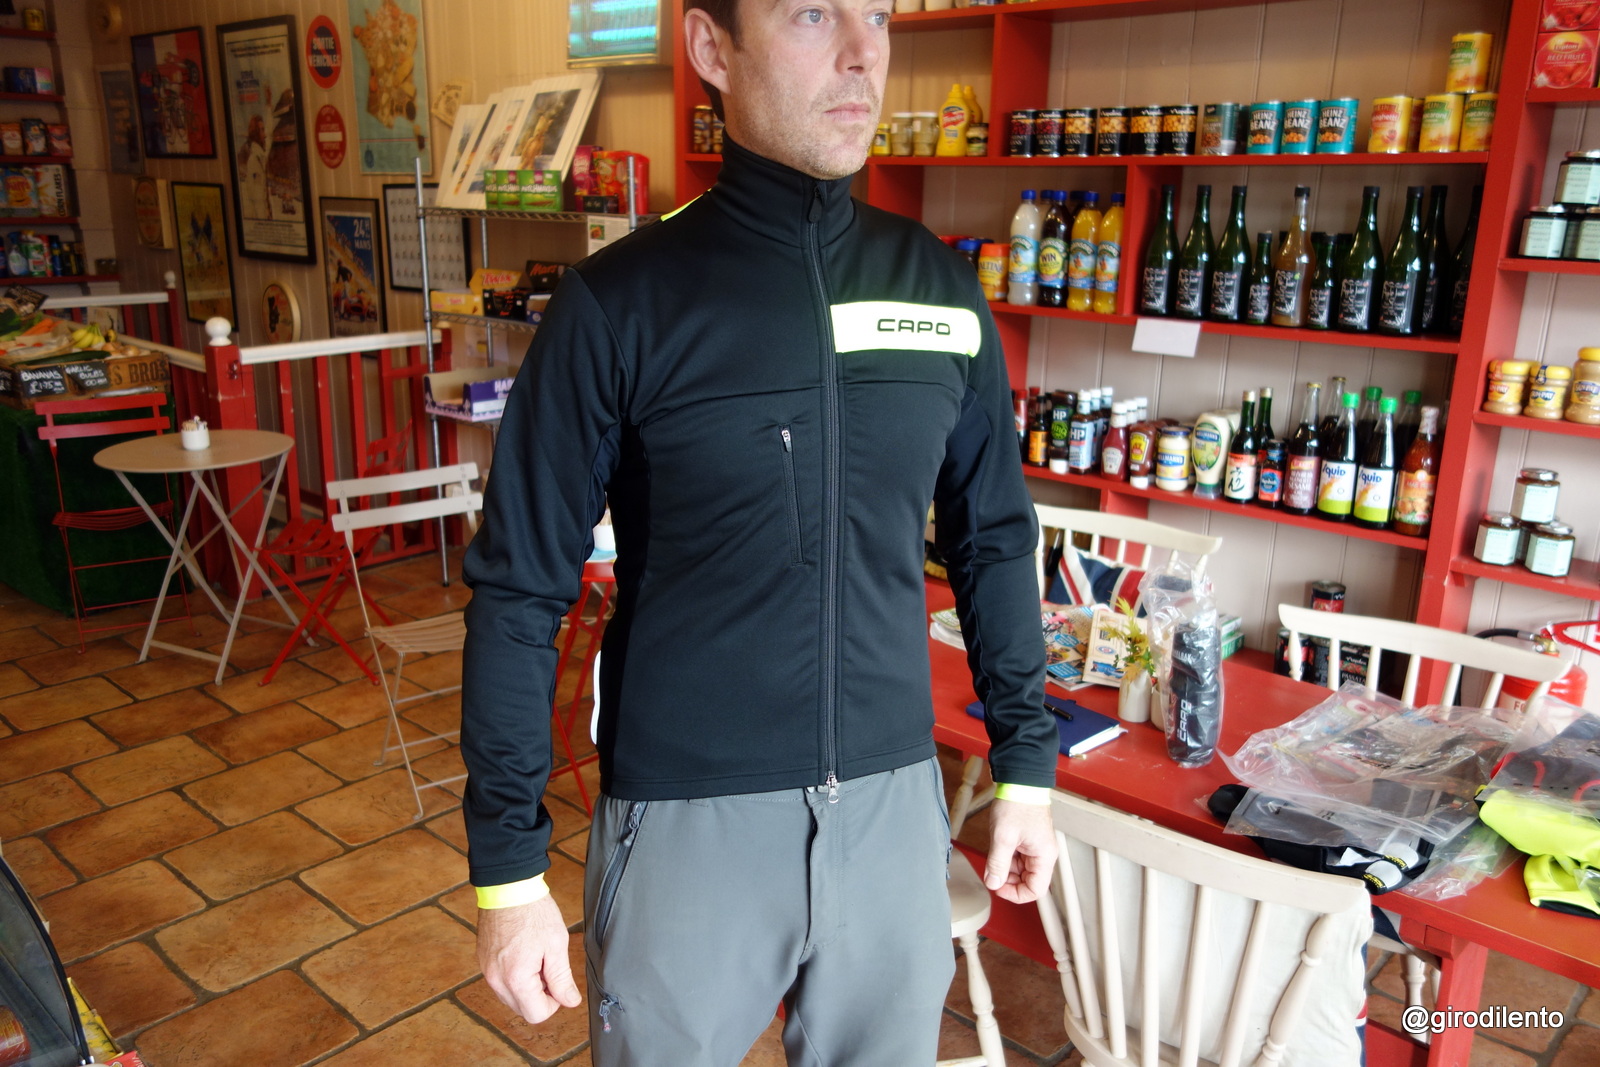 Capo Pursuit Thermal Jacket - really impressed...